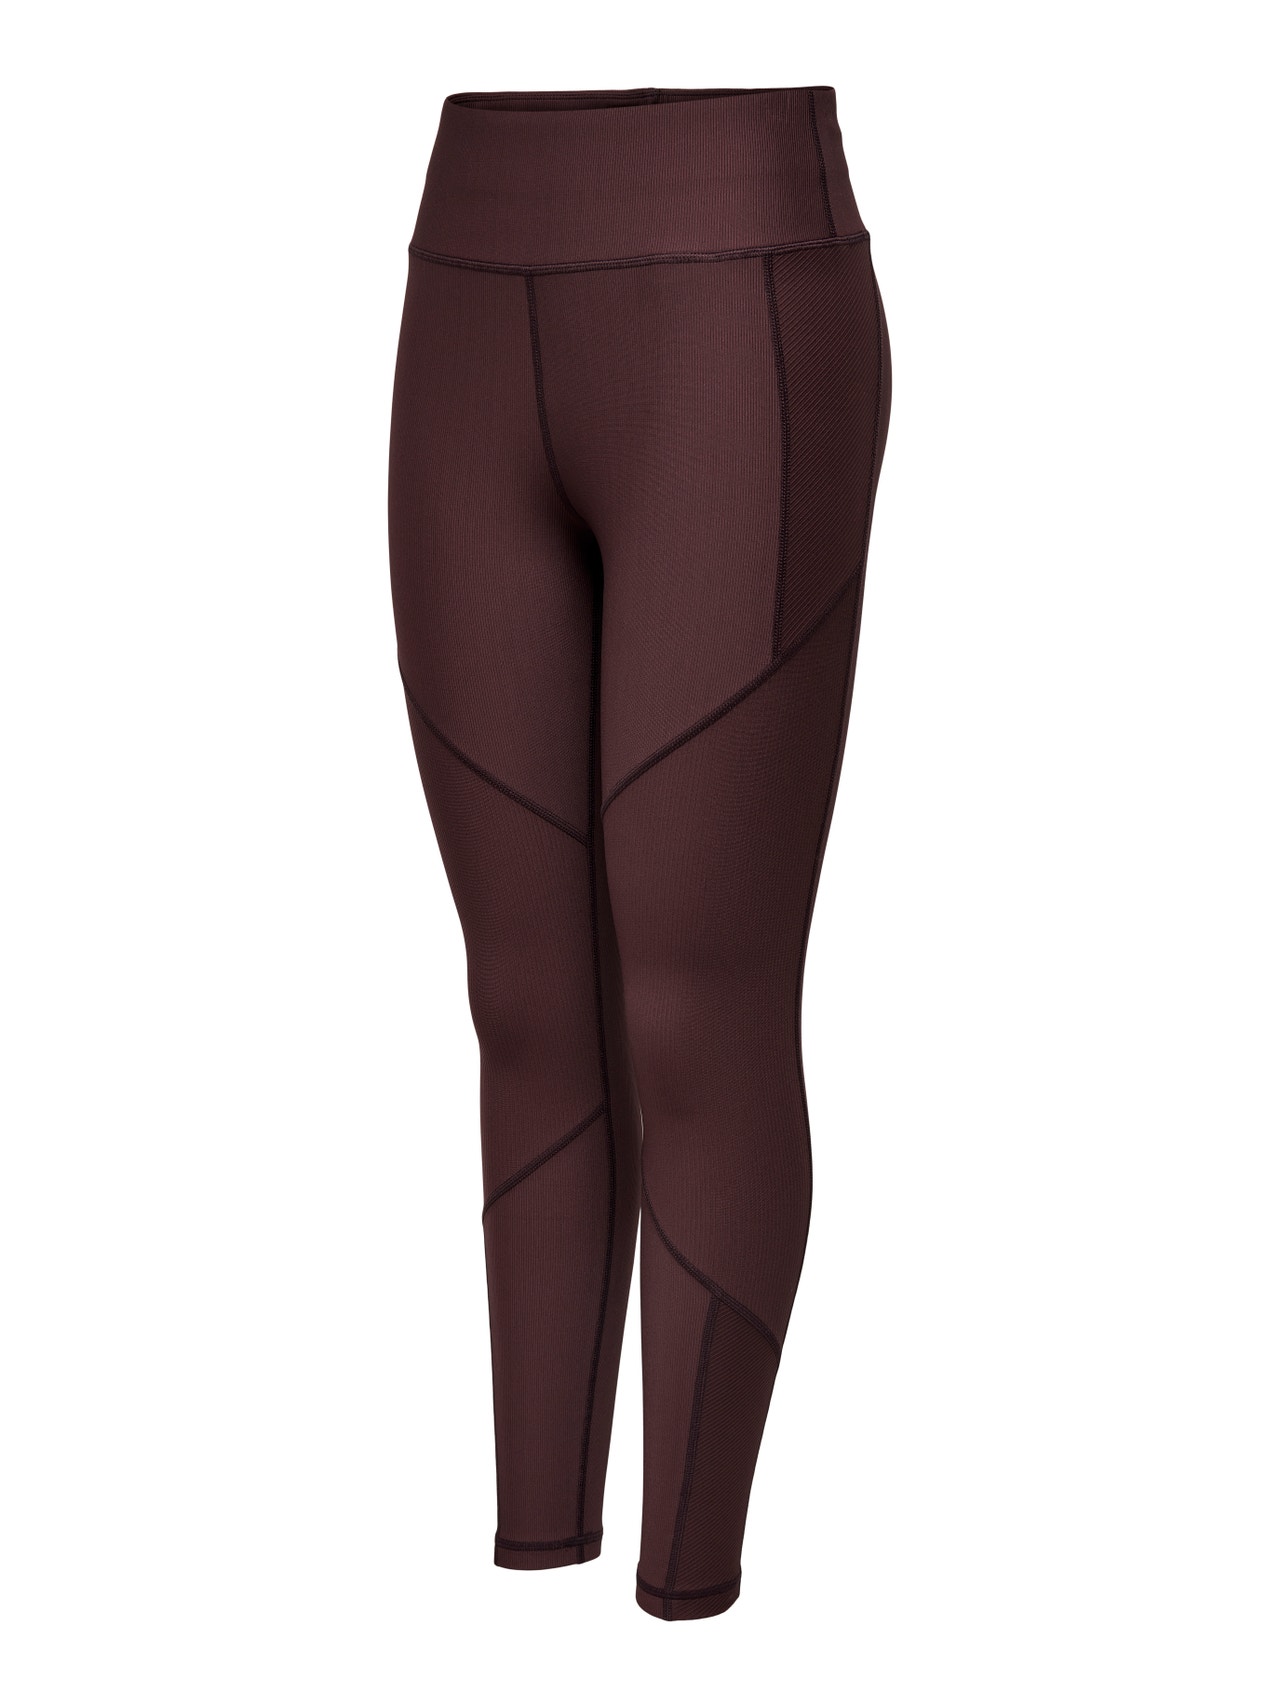 ONLY Tight fit High waist Legging -Fudge - 15207648